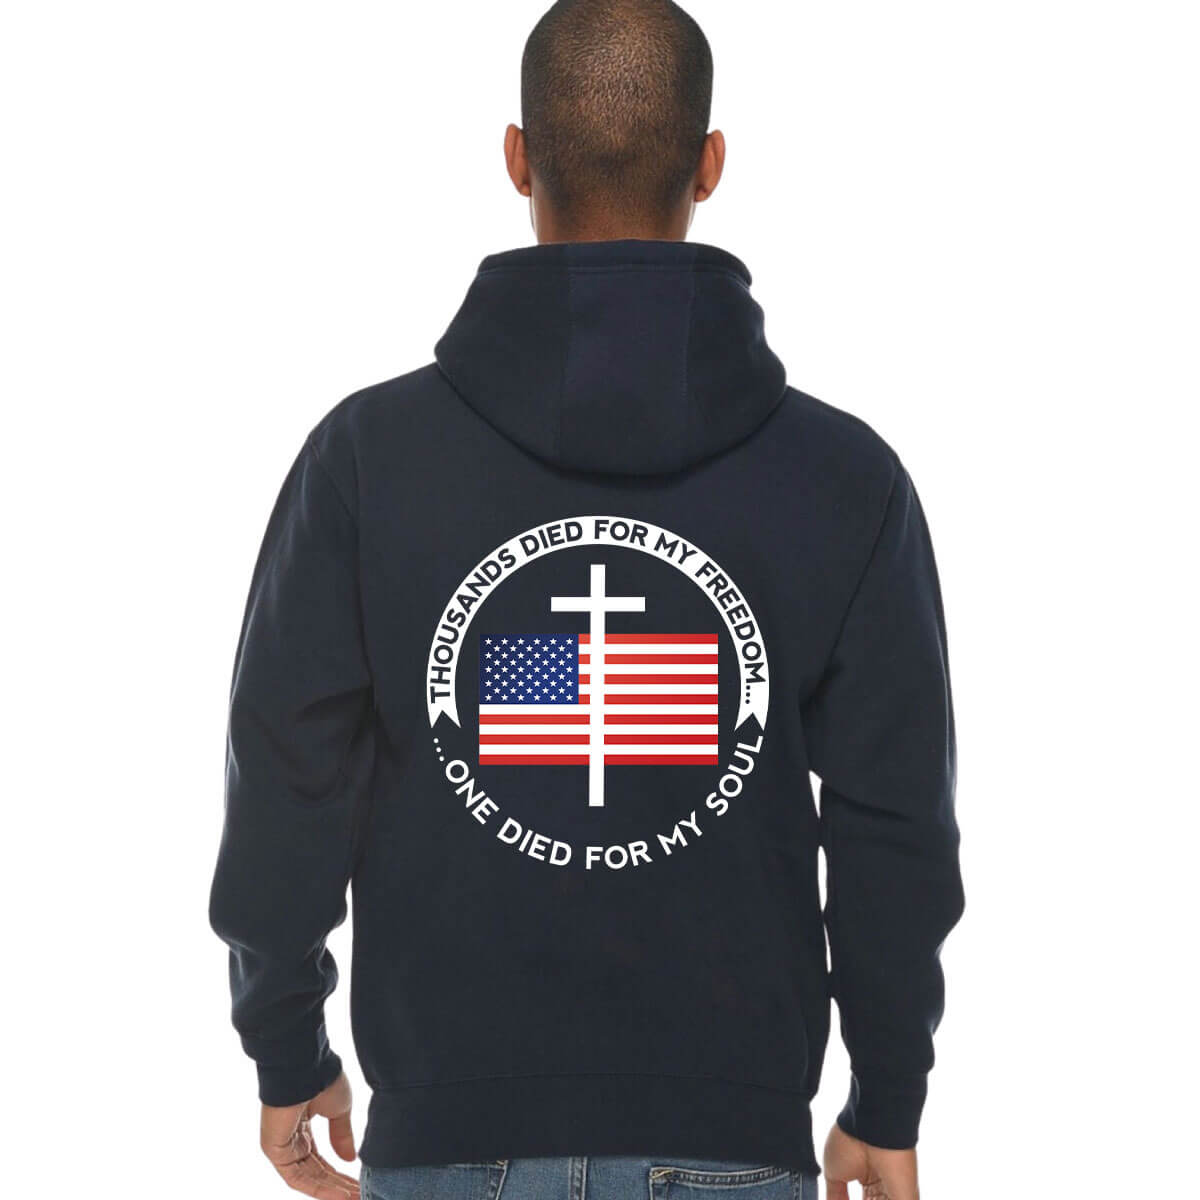 Thousands Died For My Freedom One Died For My Soul Men's Full Zip Sweatshirt Hoodie